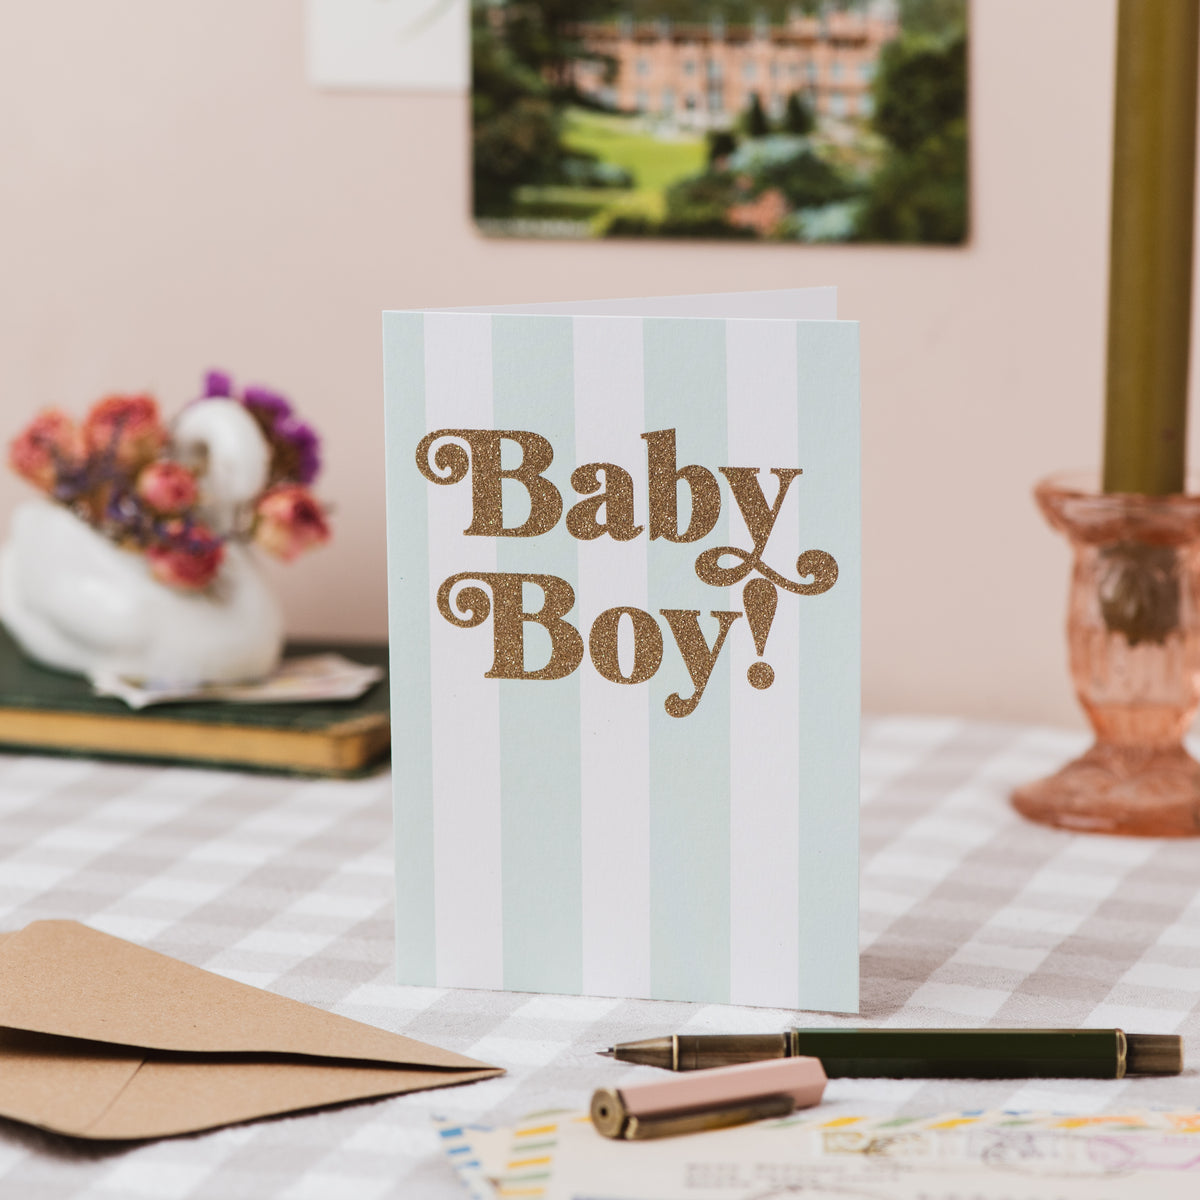 'Baby Boy' New Baby Greetings Card - Biodegradable Glitter